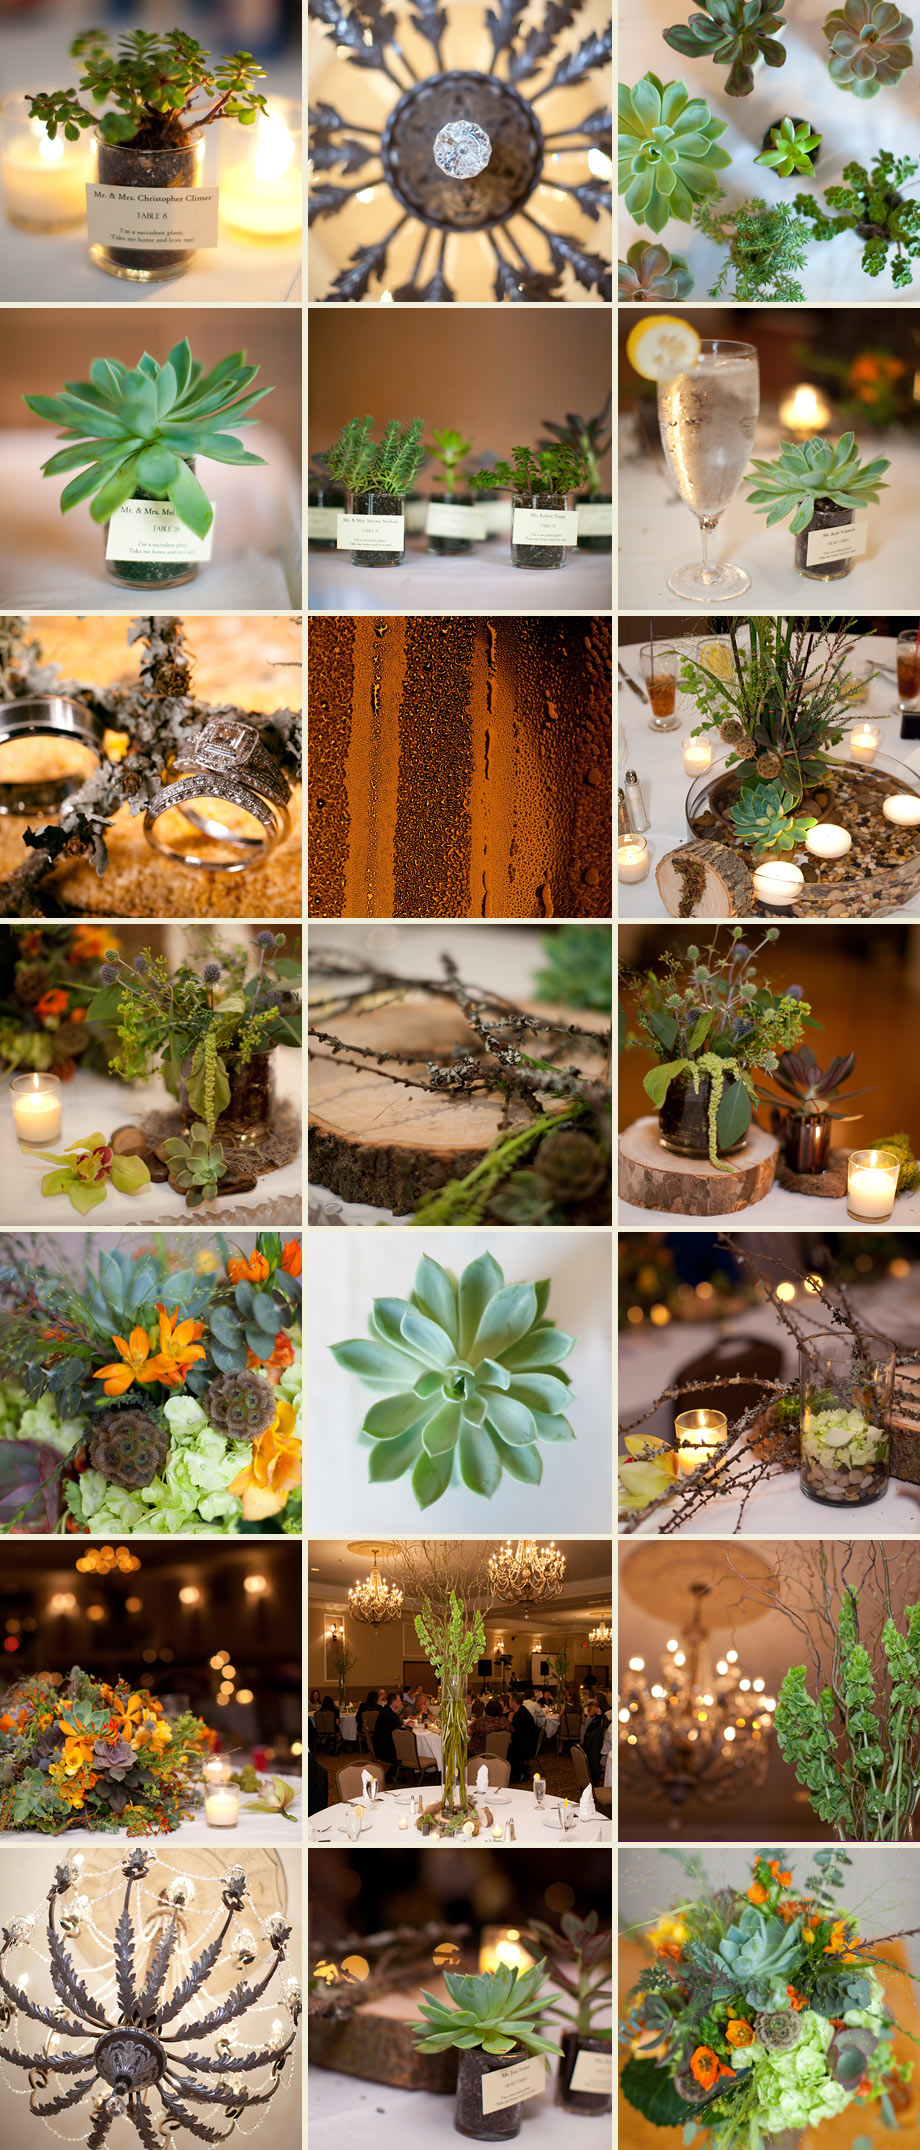 wood plants green centerpieces rustic earthy photos